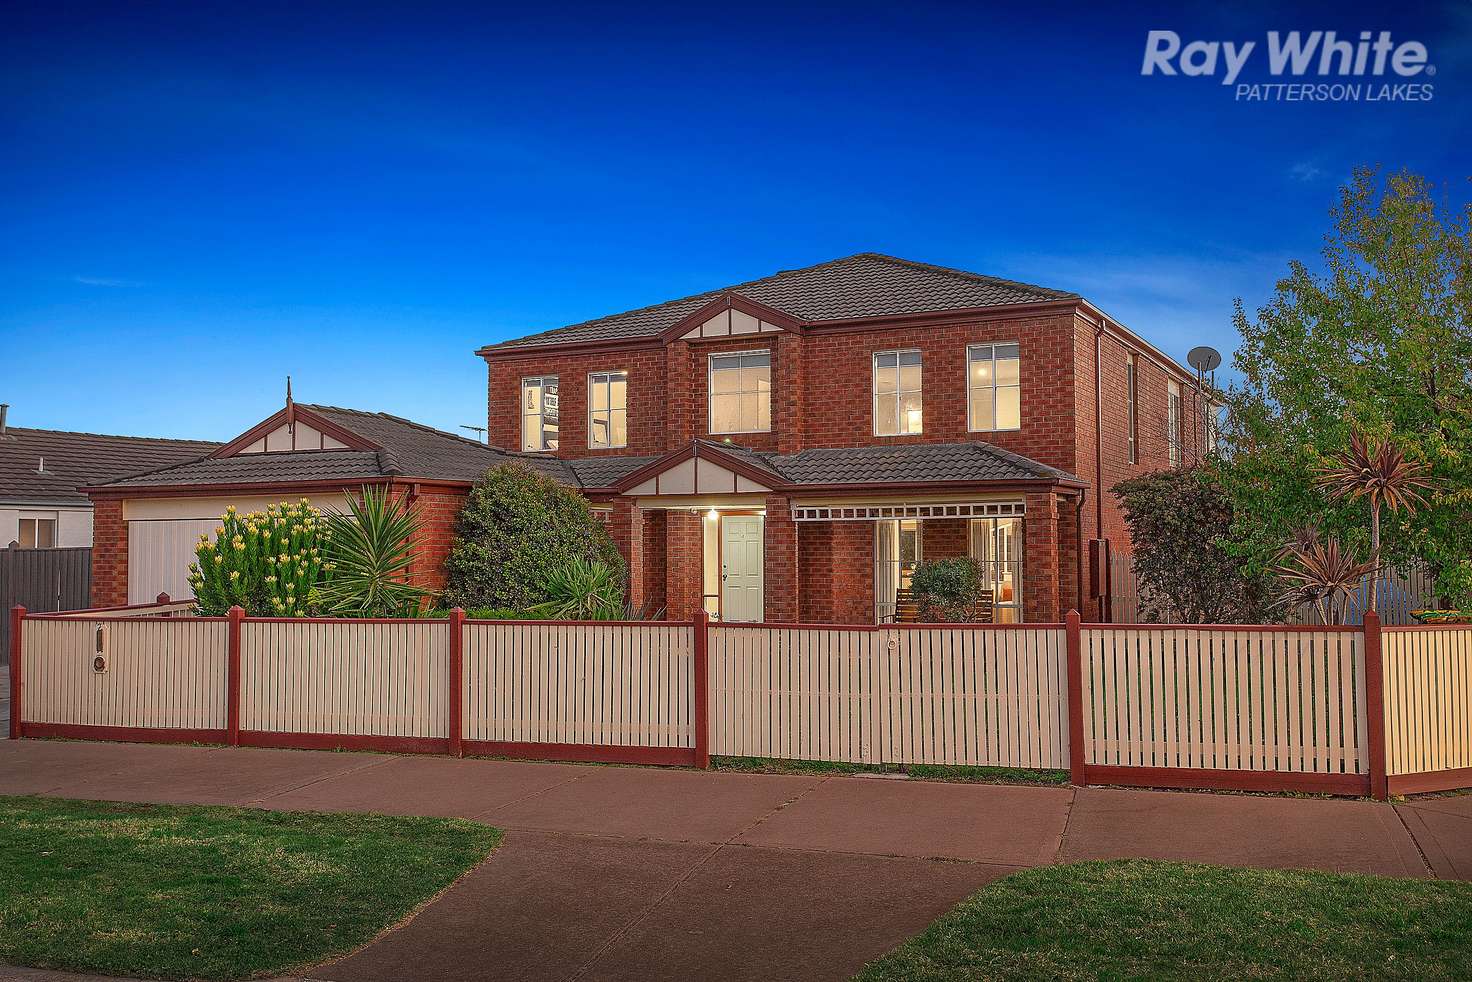 Main view of Homely house listing, 2 Royal Charlotte Drive, Patterson Lakes VIC 3197